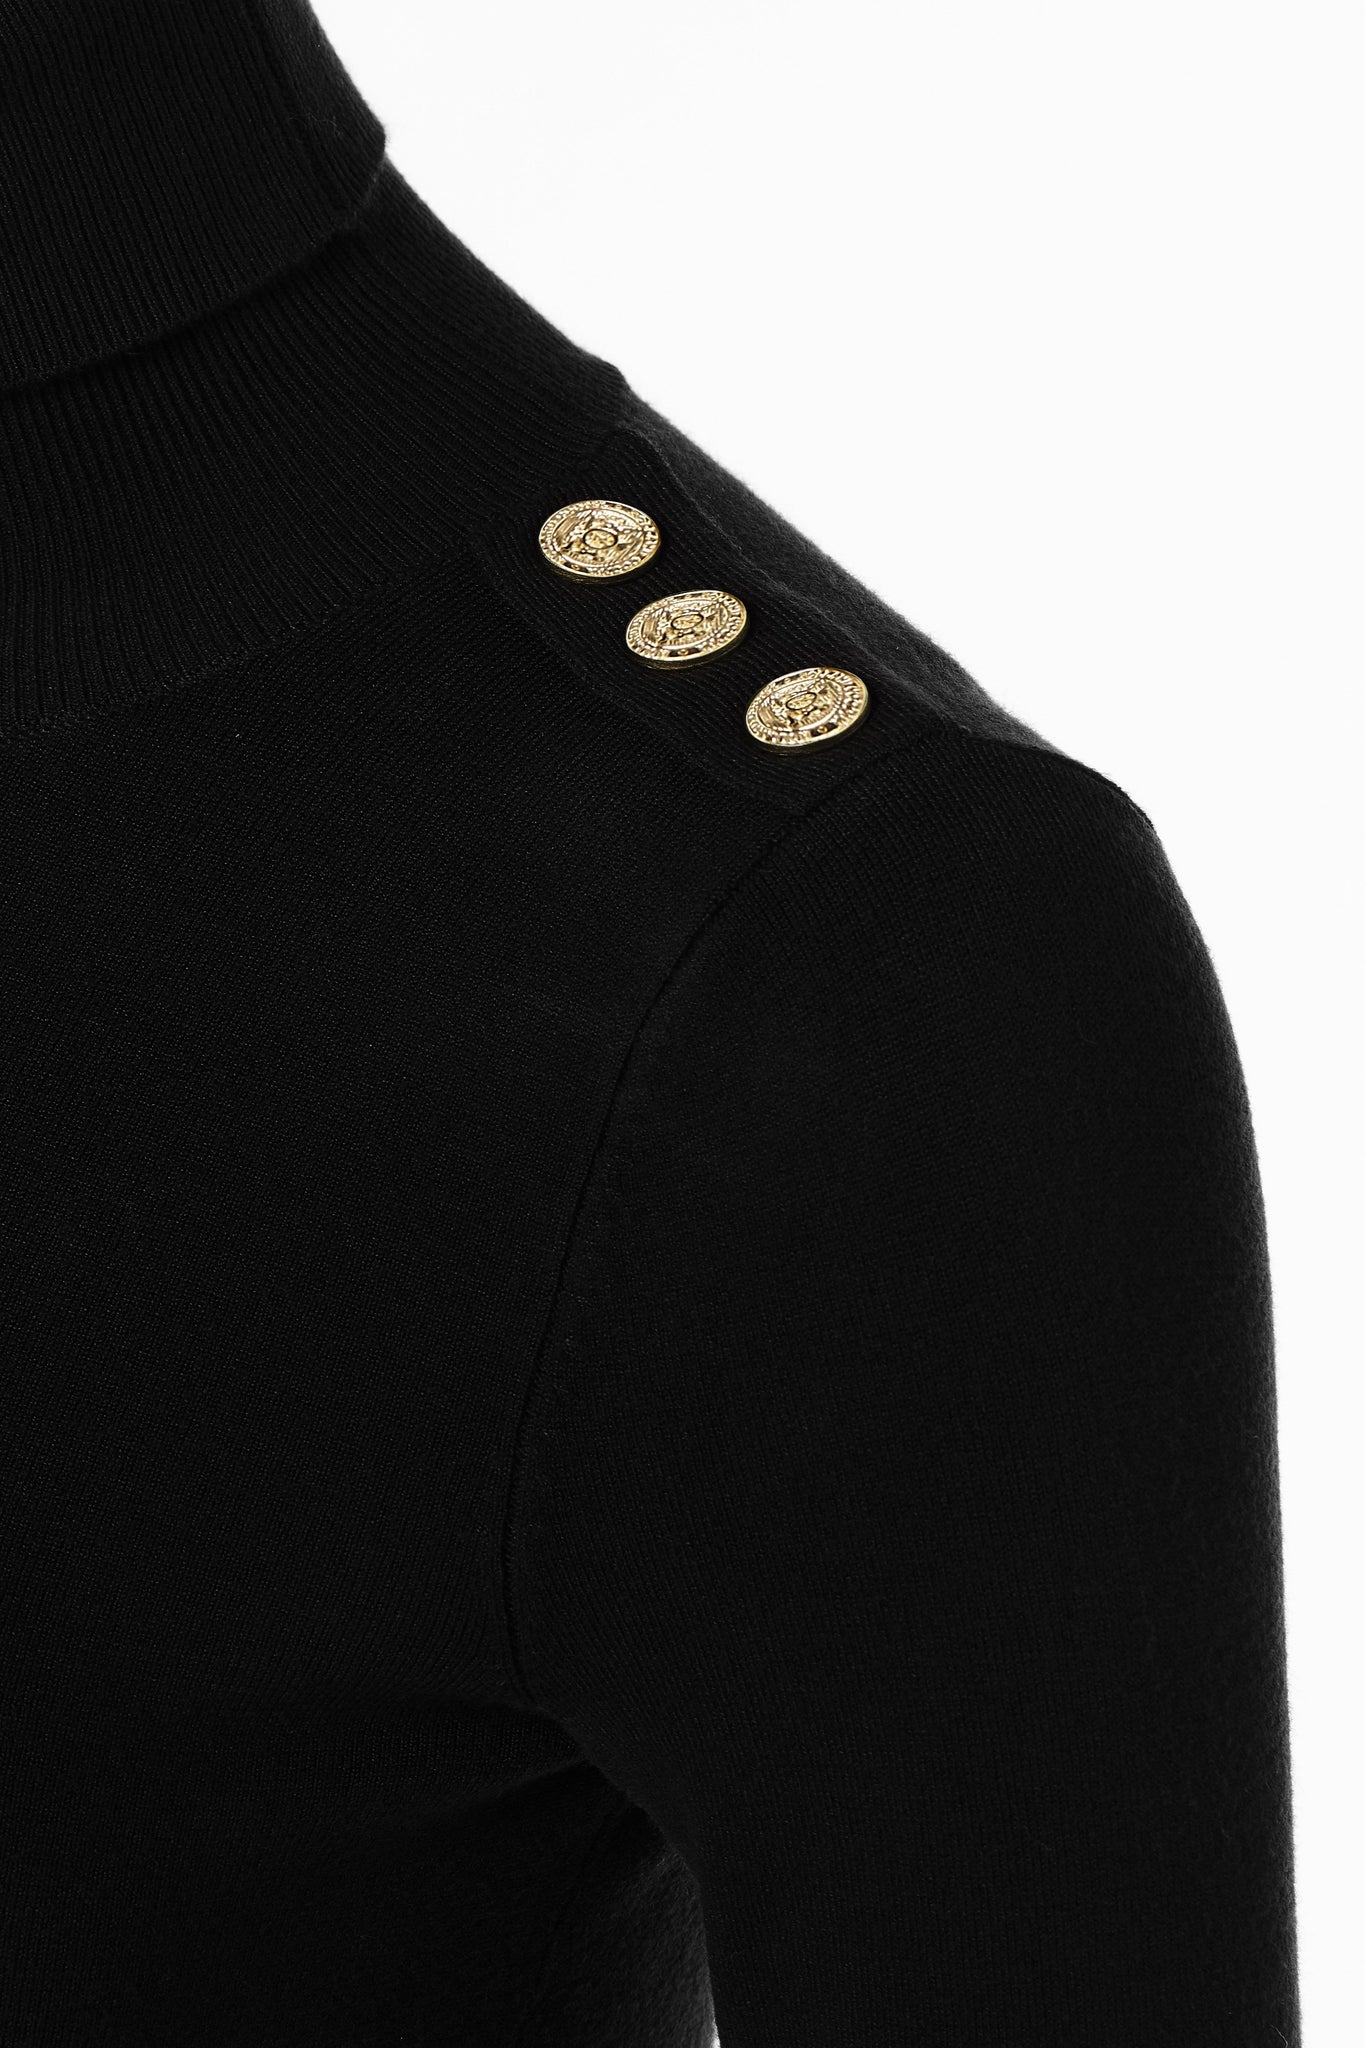 gold button detail across shoulders of super soft lightweight jumper in black with ribbed roll neck collar, cuffs and hem